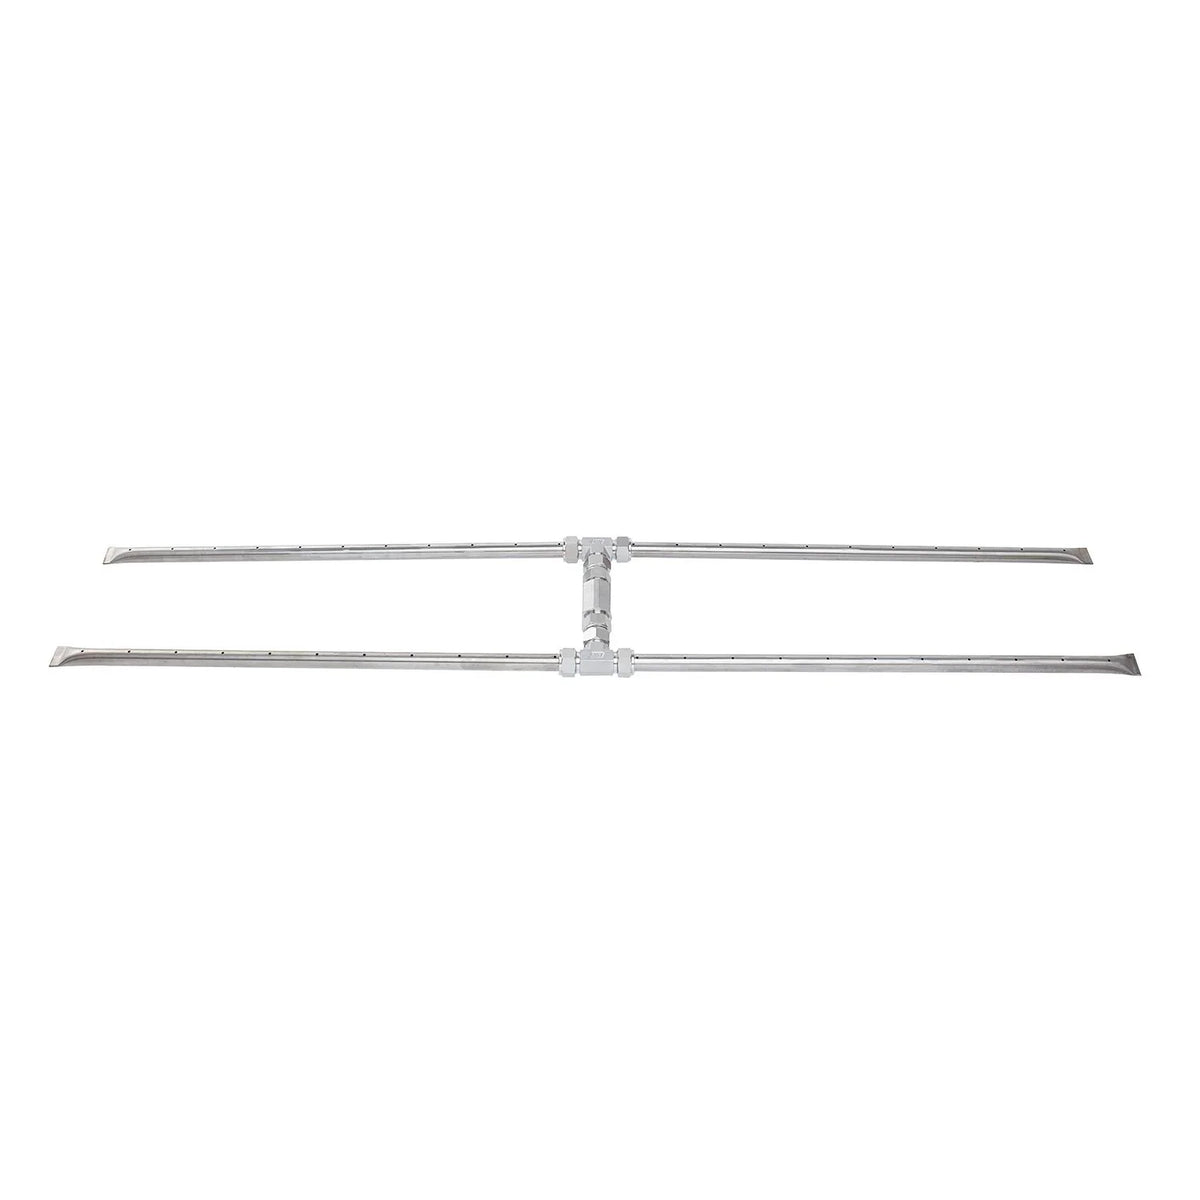 Fire By Design 84" x 6" RHB846NG Marine Grade Stainless Steel Retro H-Style Natural Gas Burner